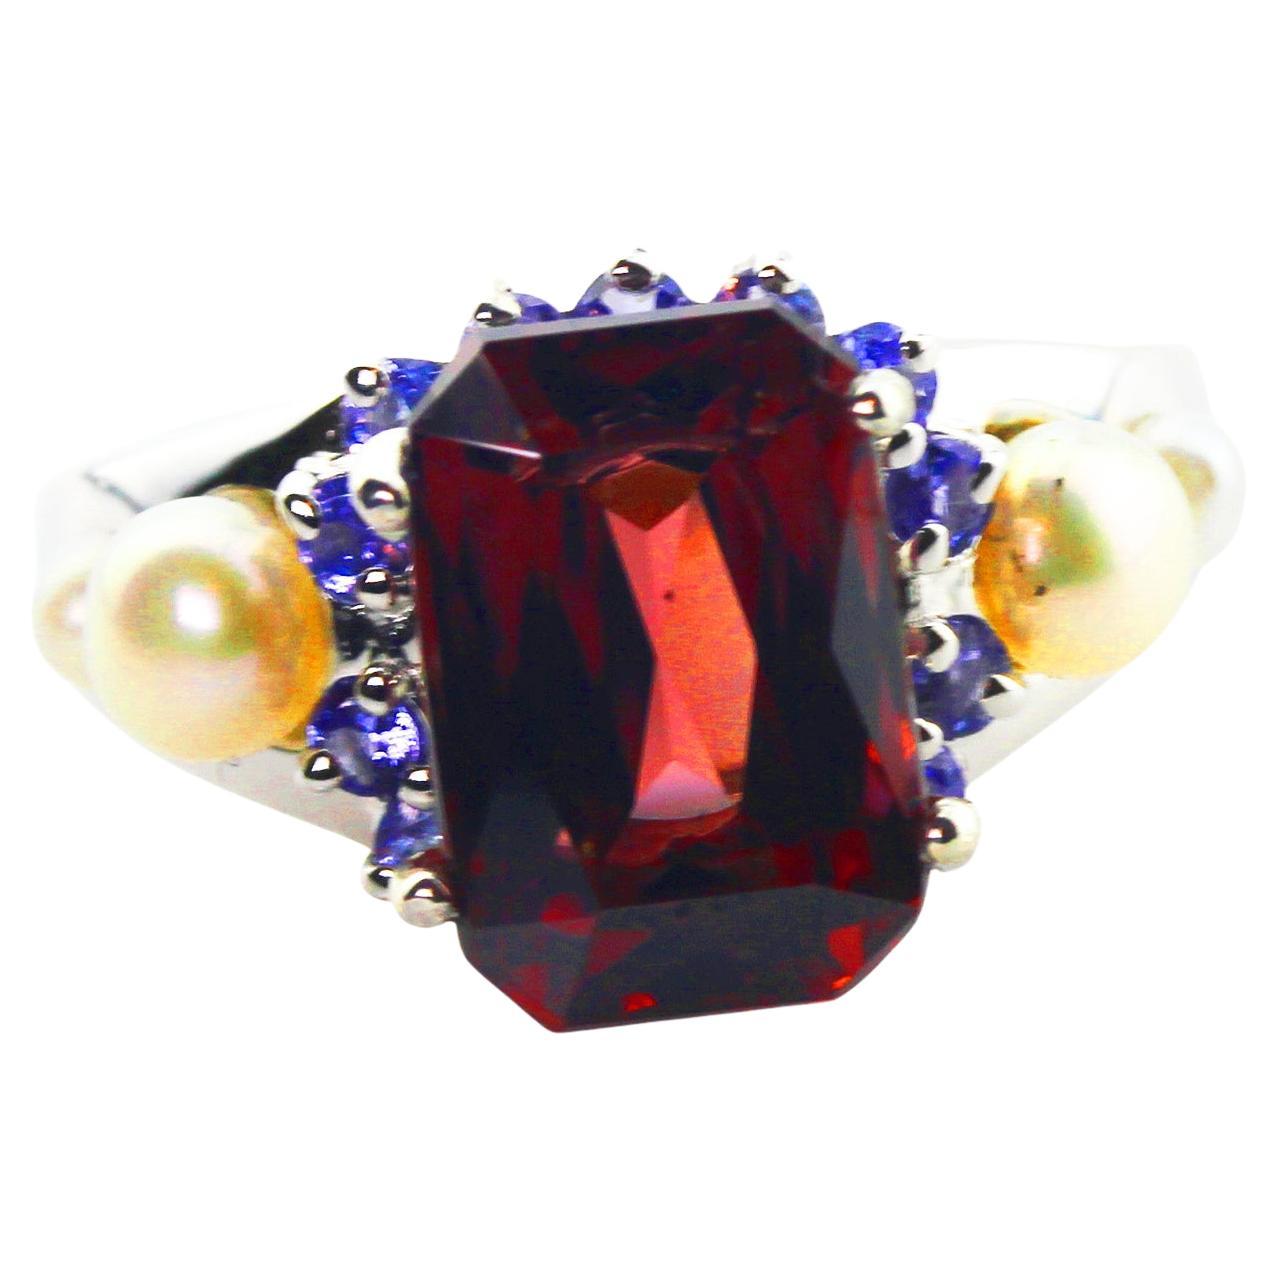 AJD Elegant 7.2 Ct Brilliant Red Zircon, Sapphire, Pearl Sterling Cocktail Ring